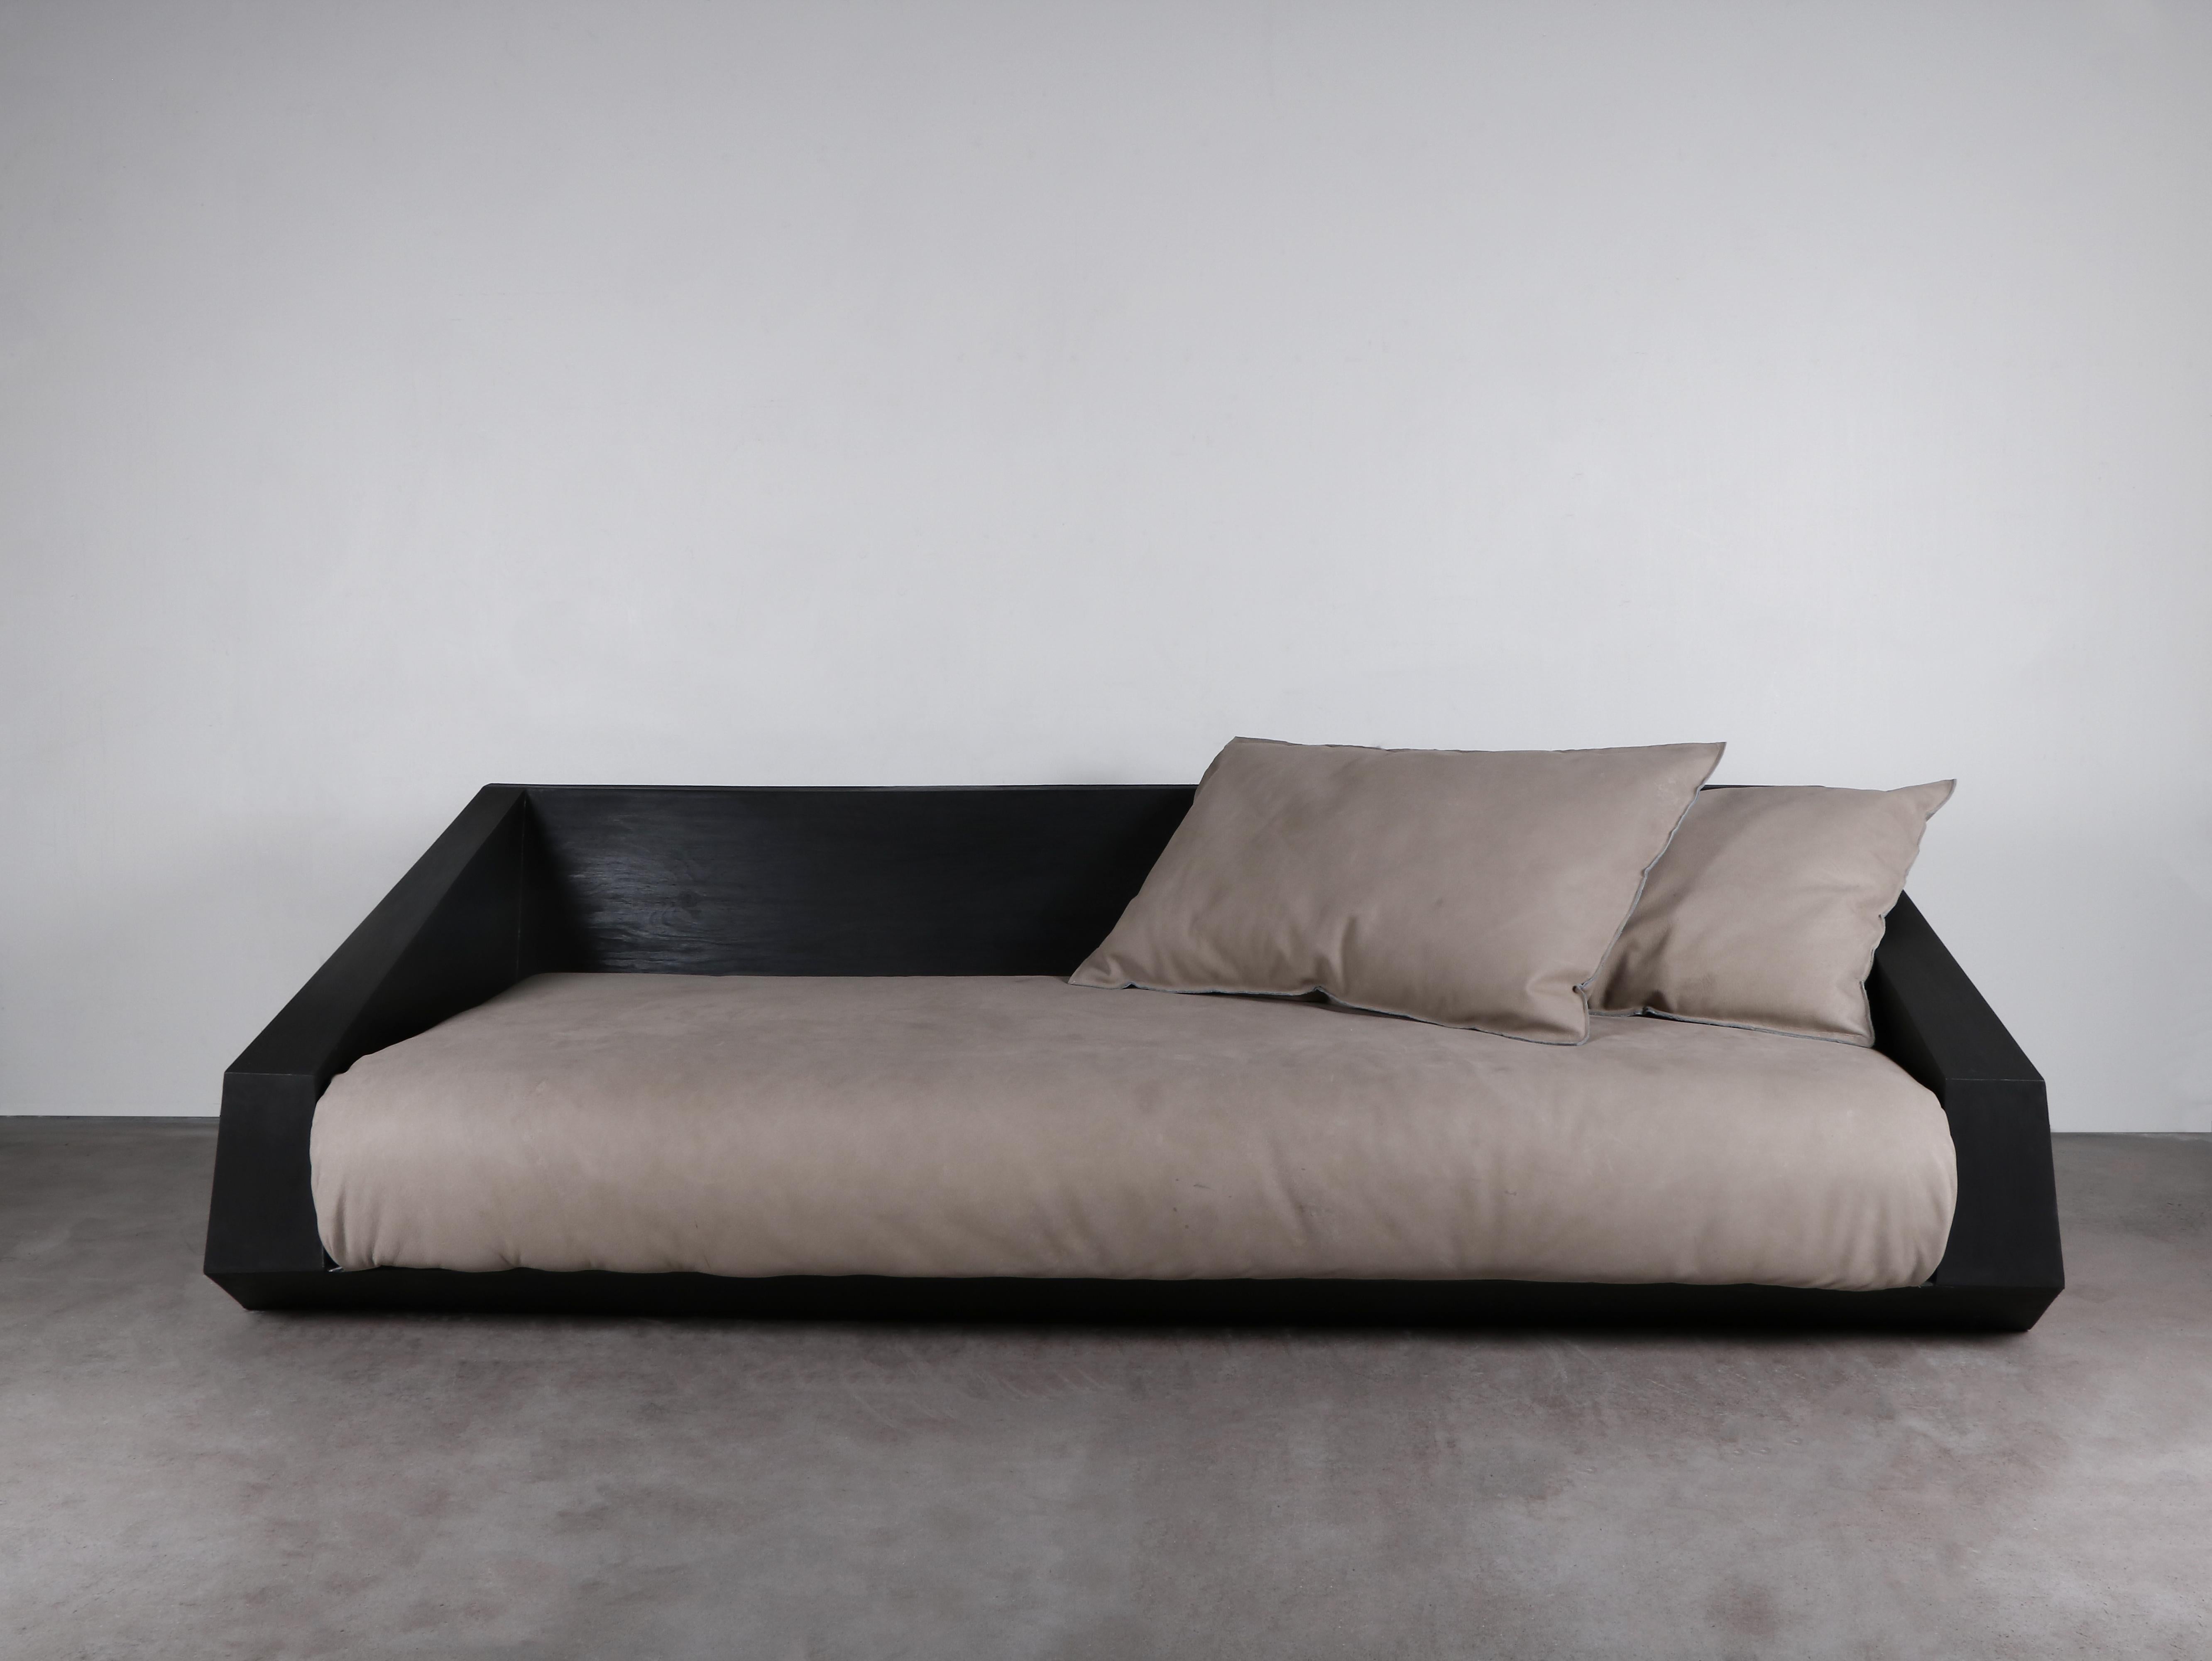 Djup sofa by Lucas Tyra Morten
Limited Edition of 15
Dimensions: L 240 x W 103 x H 65 cm
Material: Hand waxed plywood, leather

Occupying the liminal space between art and design, the multidisciplinary atelier of Lucas and Tyra Morten is a small